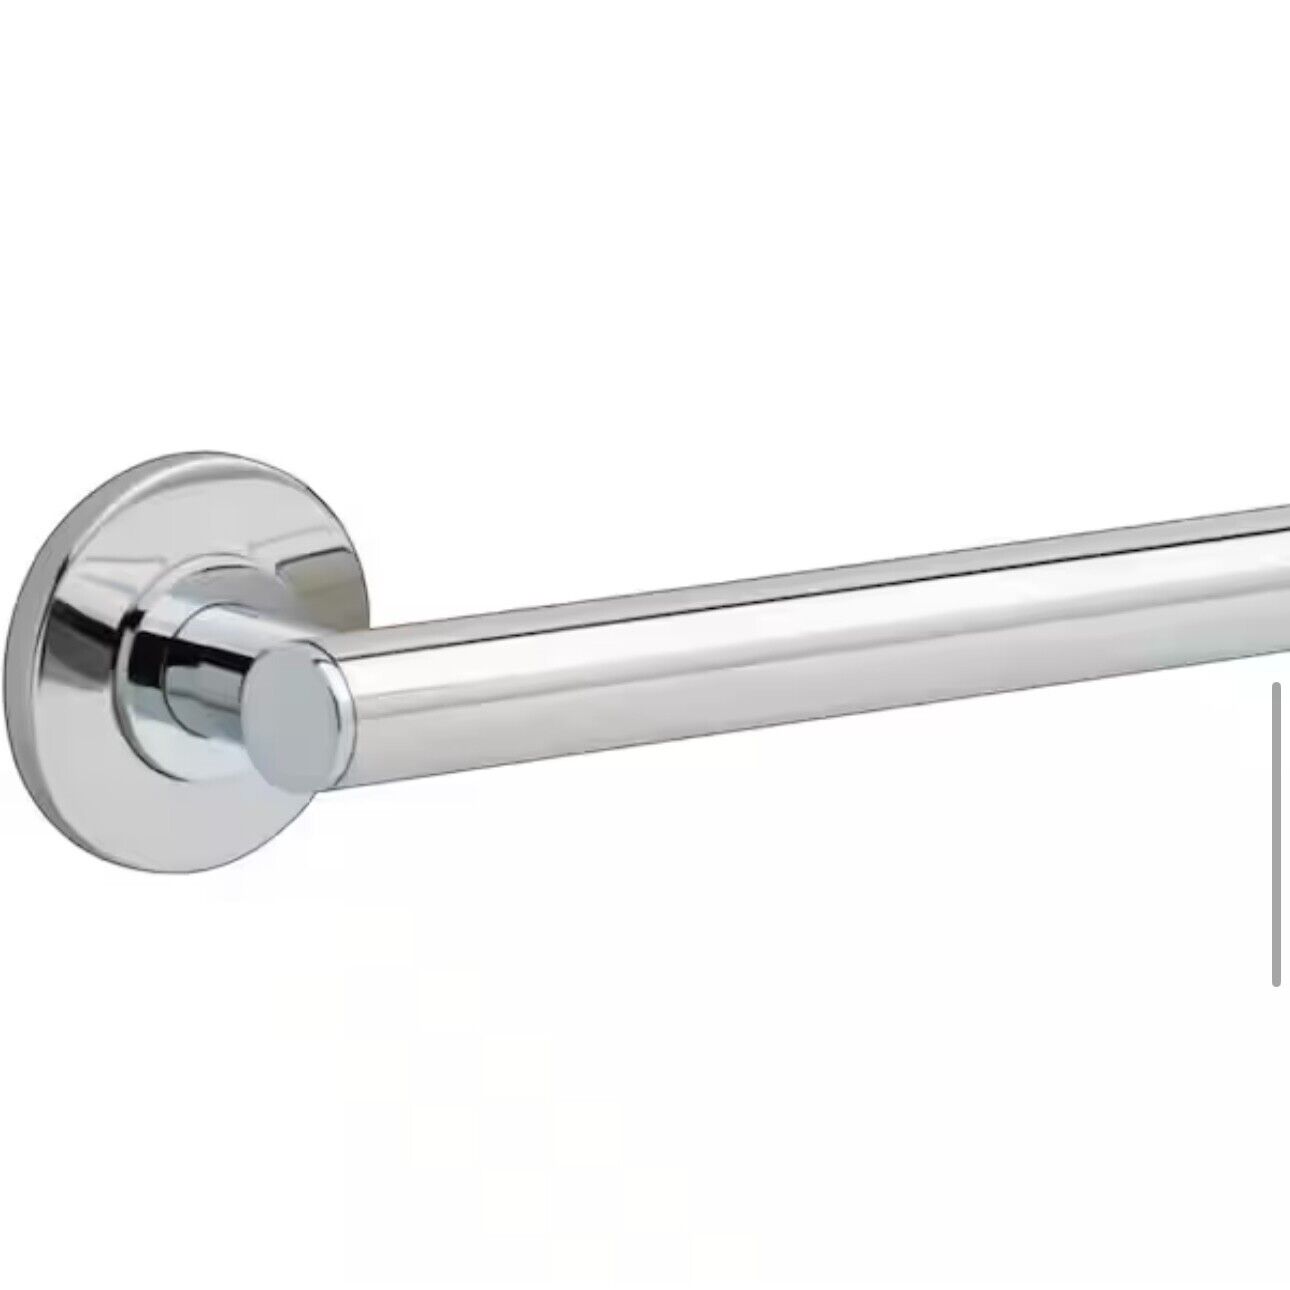 Contemporary 24 in x 1-1/4 in Grab Bar Concealed Screw ADA Compliant Decorative